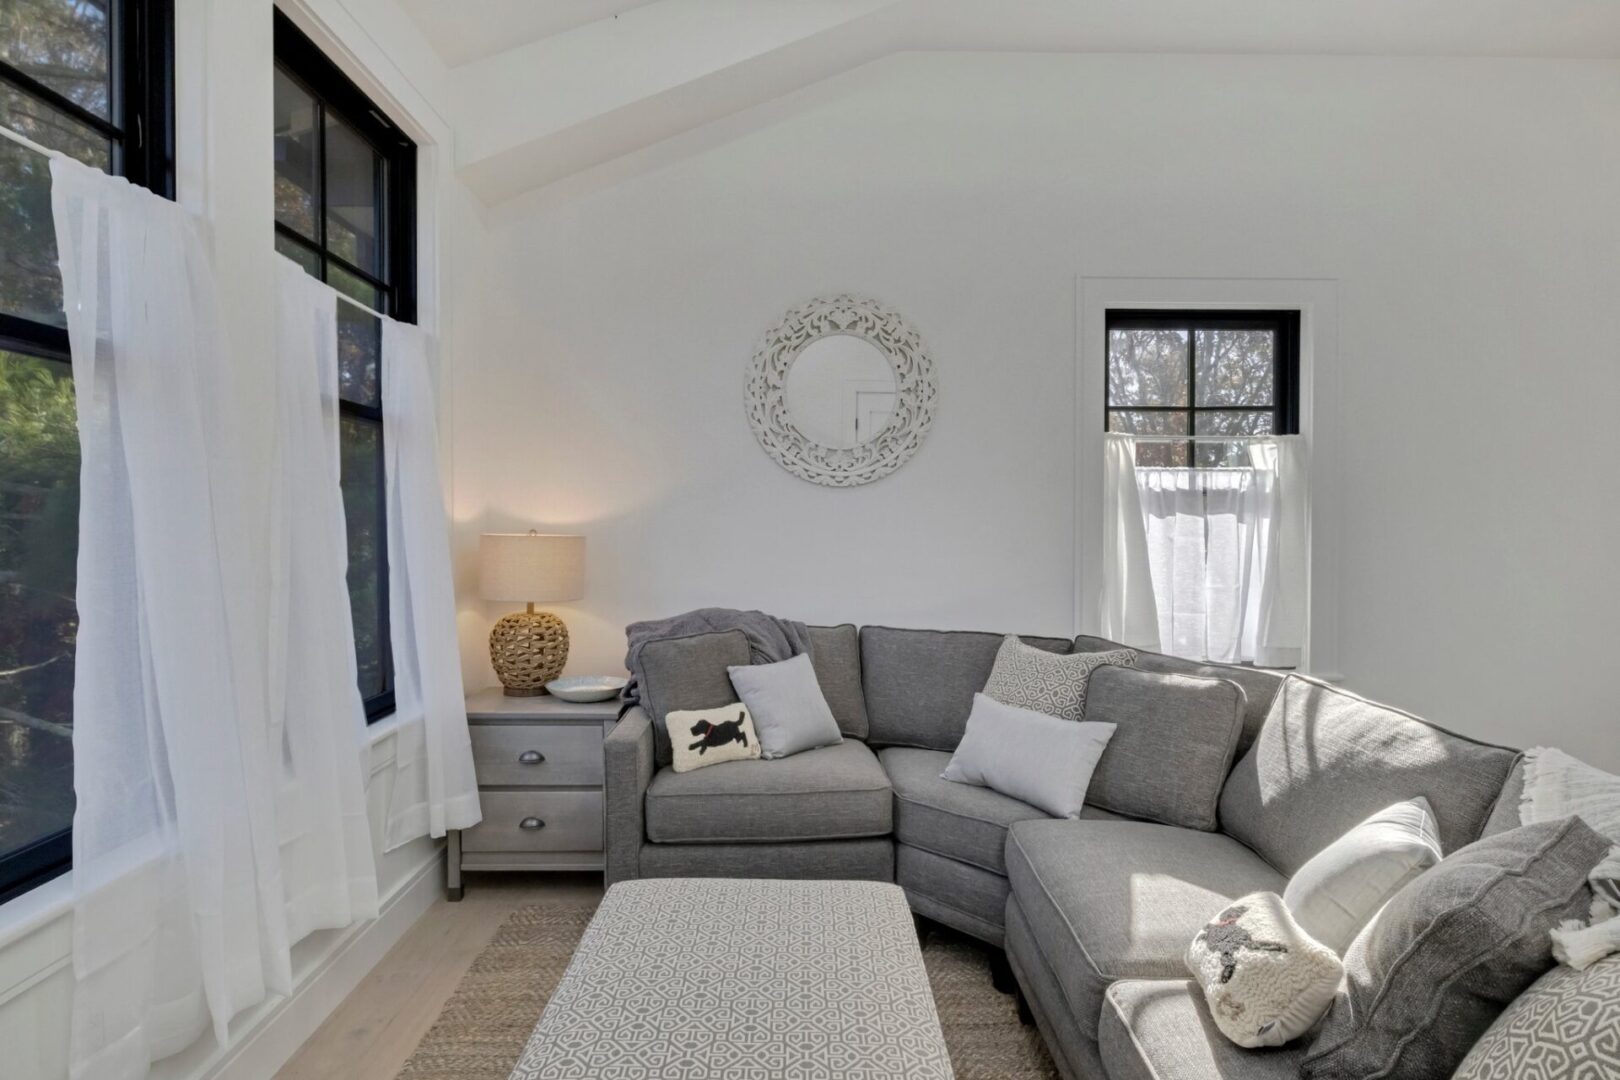 A living room with white walls and grey furniture.